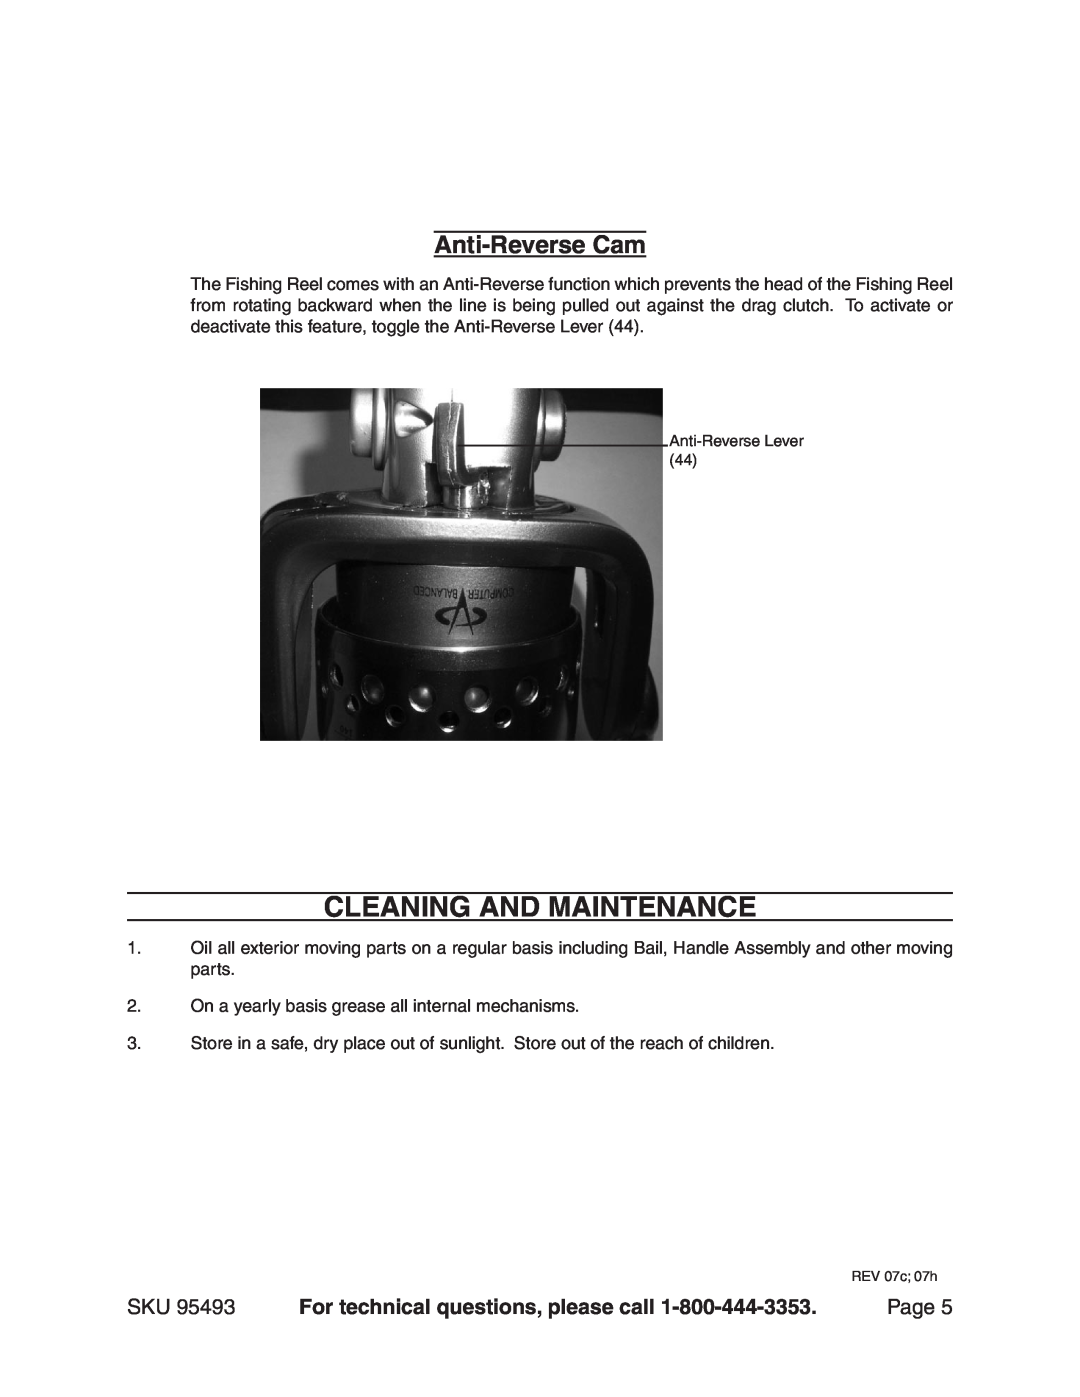 Harbor Freight Tools 95493 manual Cleaning and maintenance, Anti-Reverse Cam, For technical questions, please call, Page 